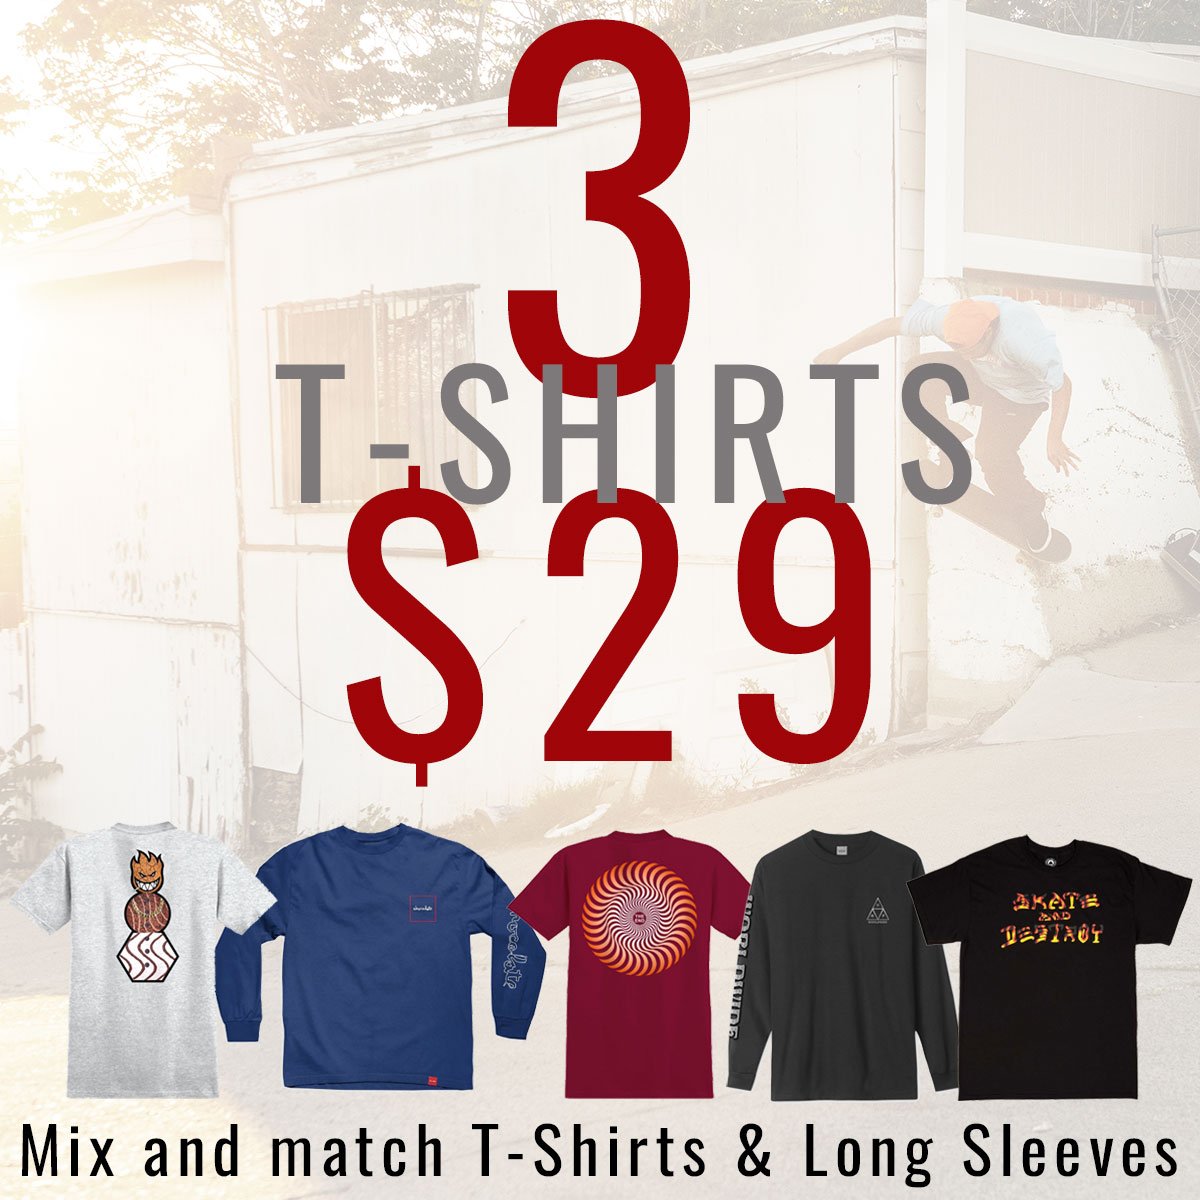 3 T-Shirts for $29 ends at Midnight tonight!